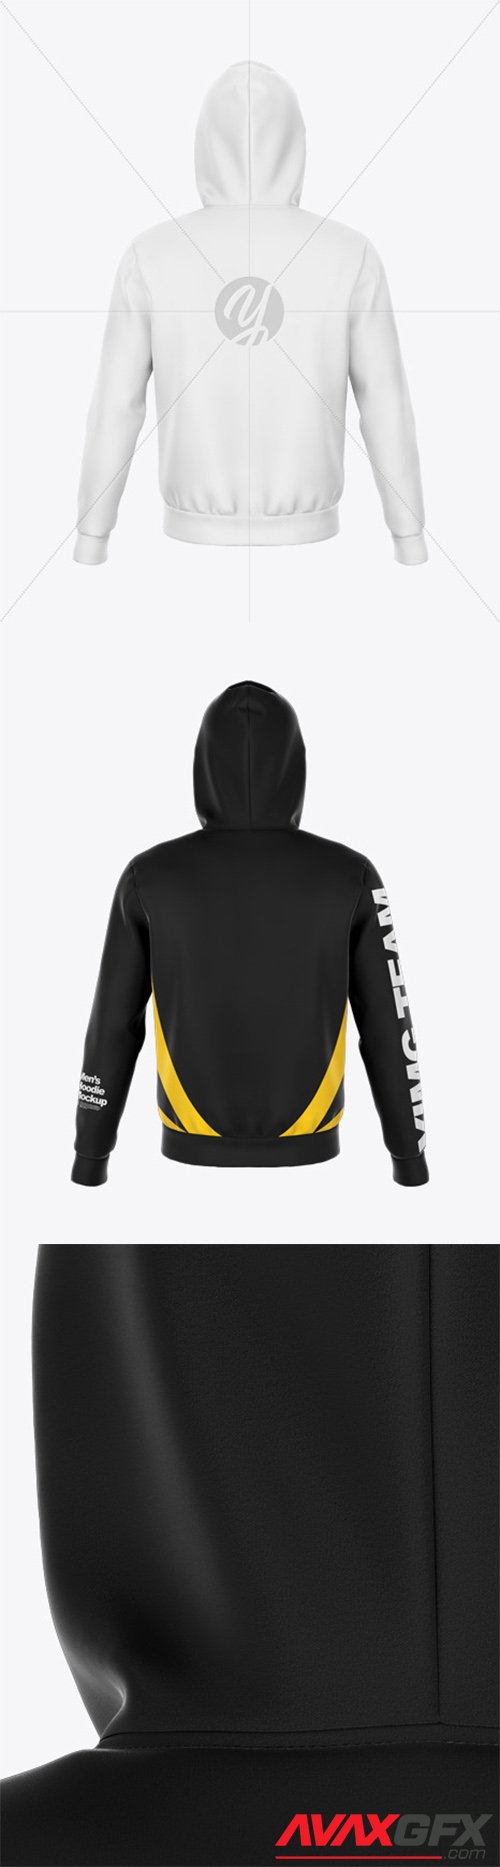 Download Hoodie Mockup - Back View 47625 » AVAXGFX - All Downloads ...